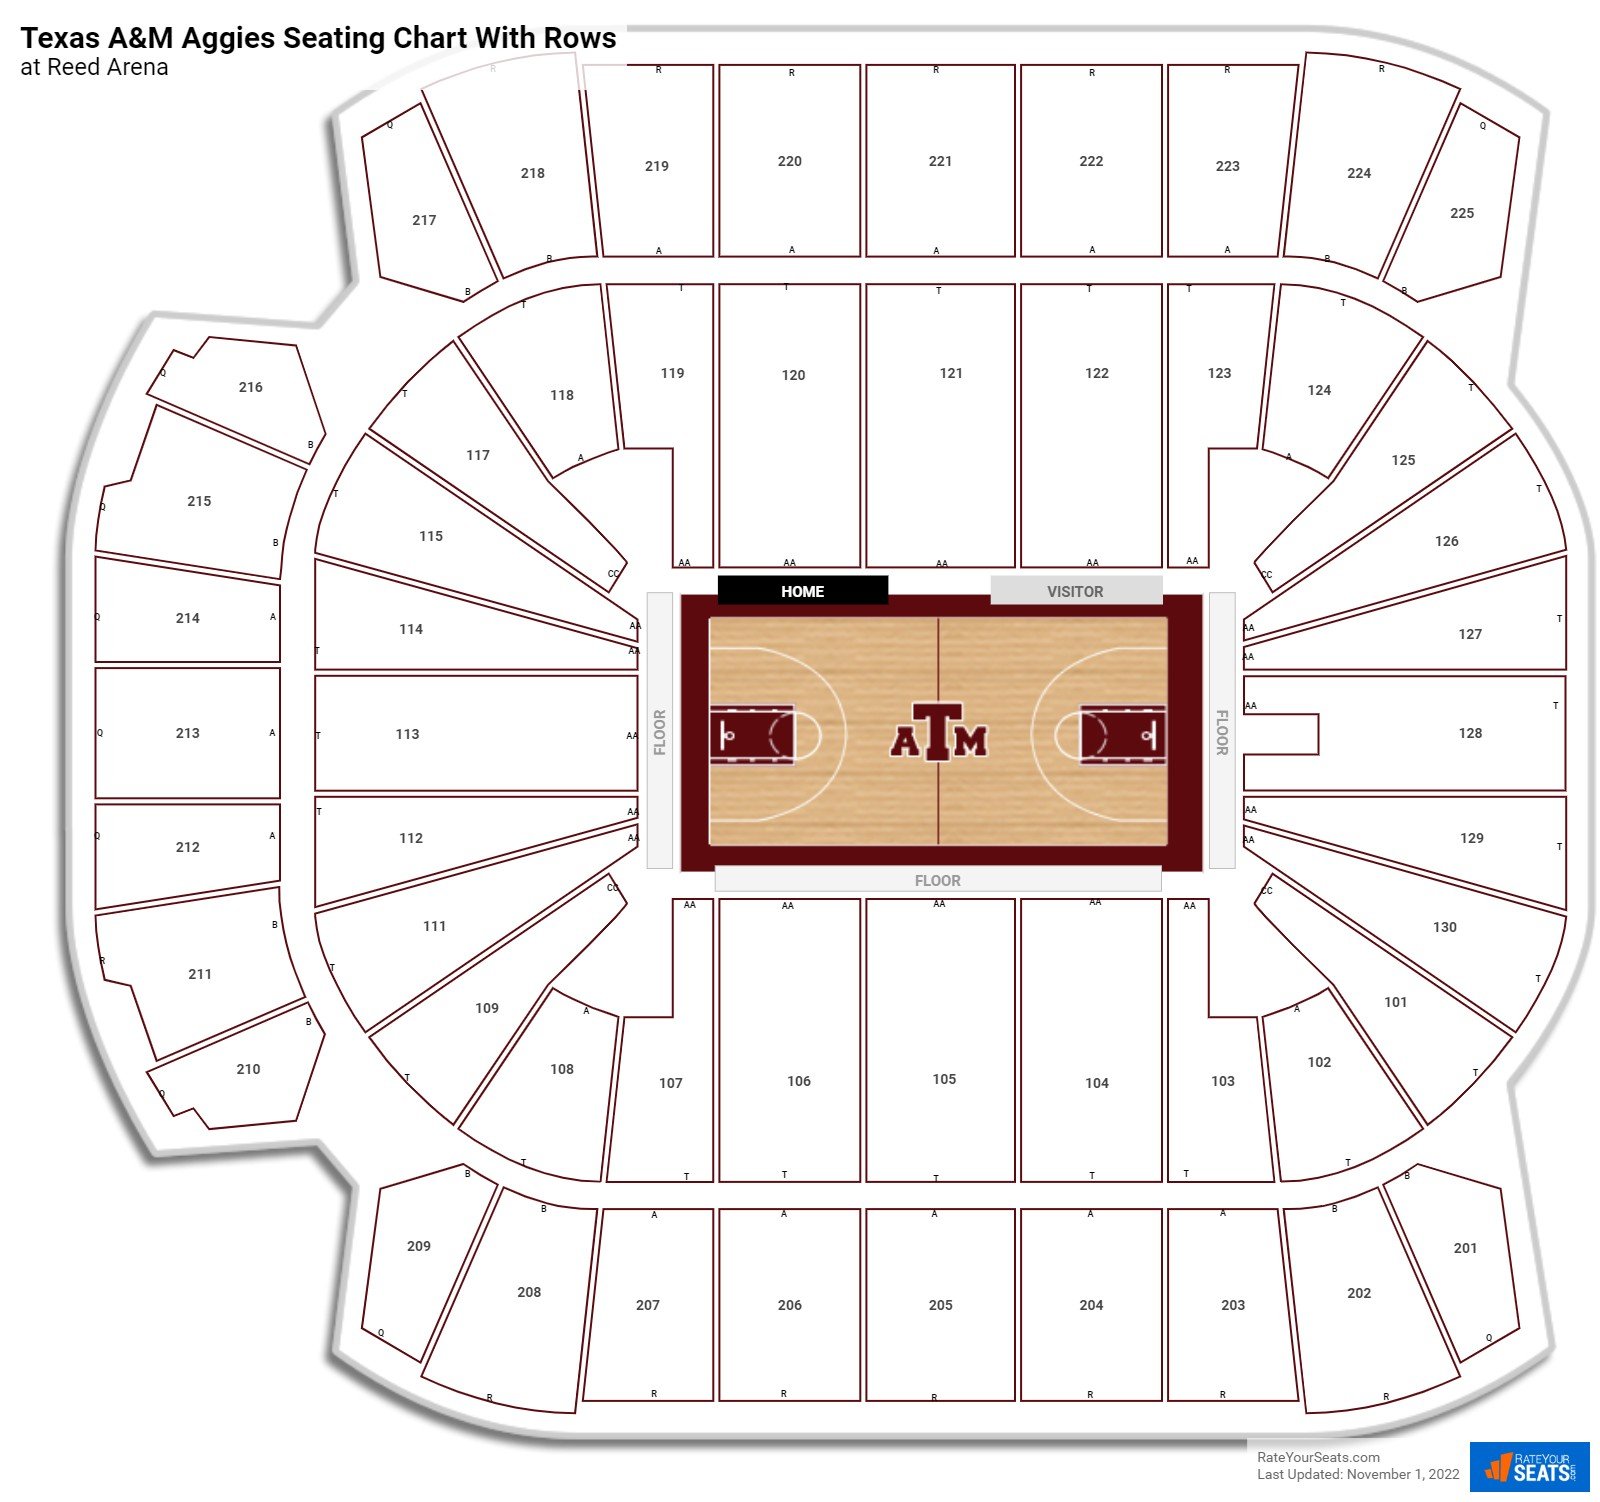 Reed Arena seating chart with row numbers